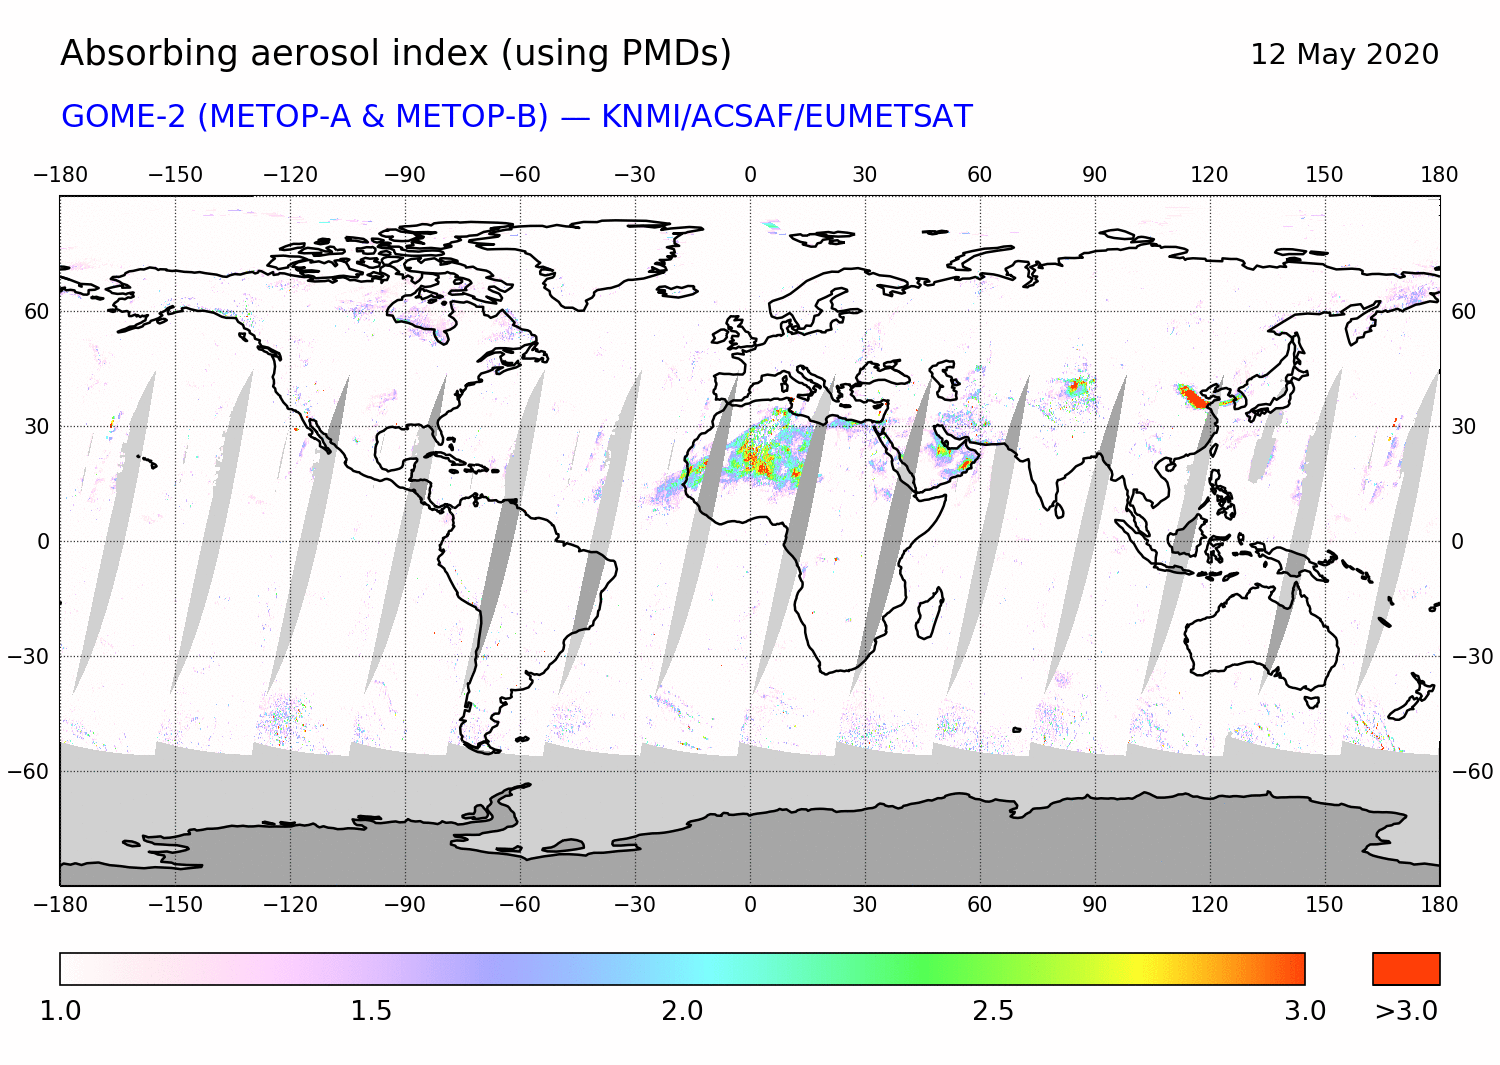 GOME-2 - Absorbing aerosol index of 12 May 2020